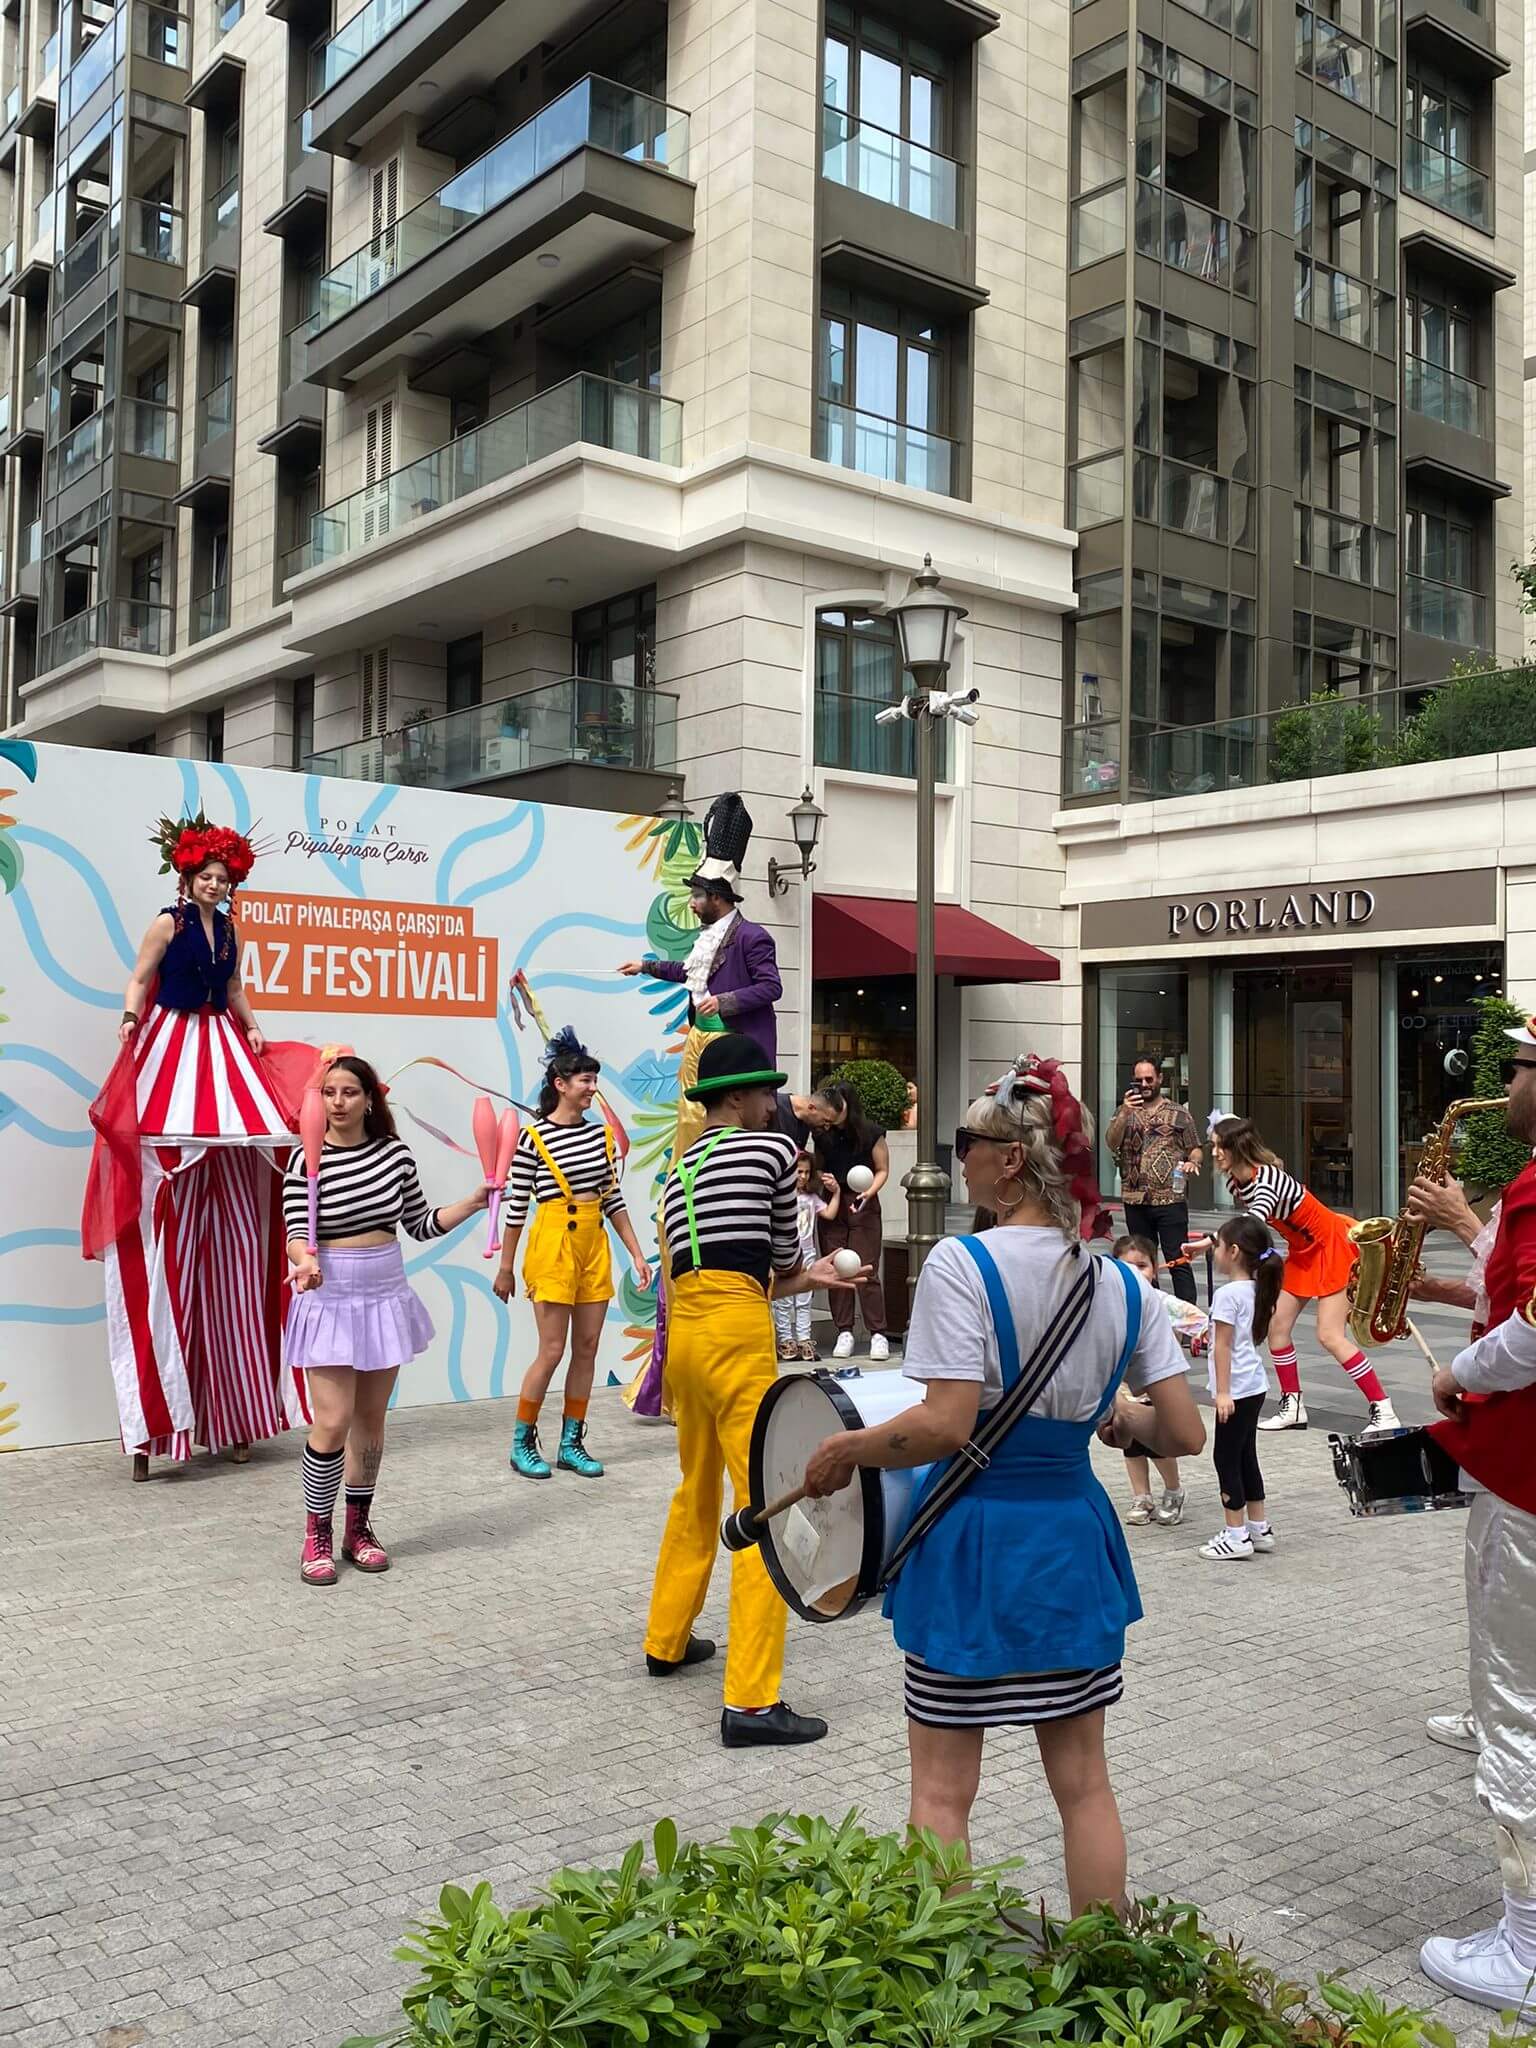 The Summer Festival, which took place over the weekend, was greeted with enthusiasm in Piyalepaşa Çarşı Strip Mall